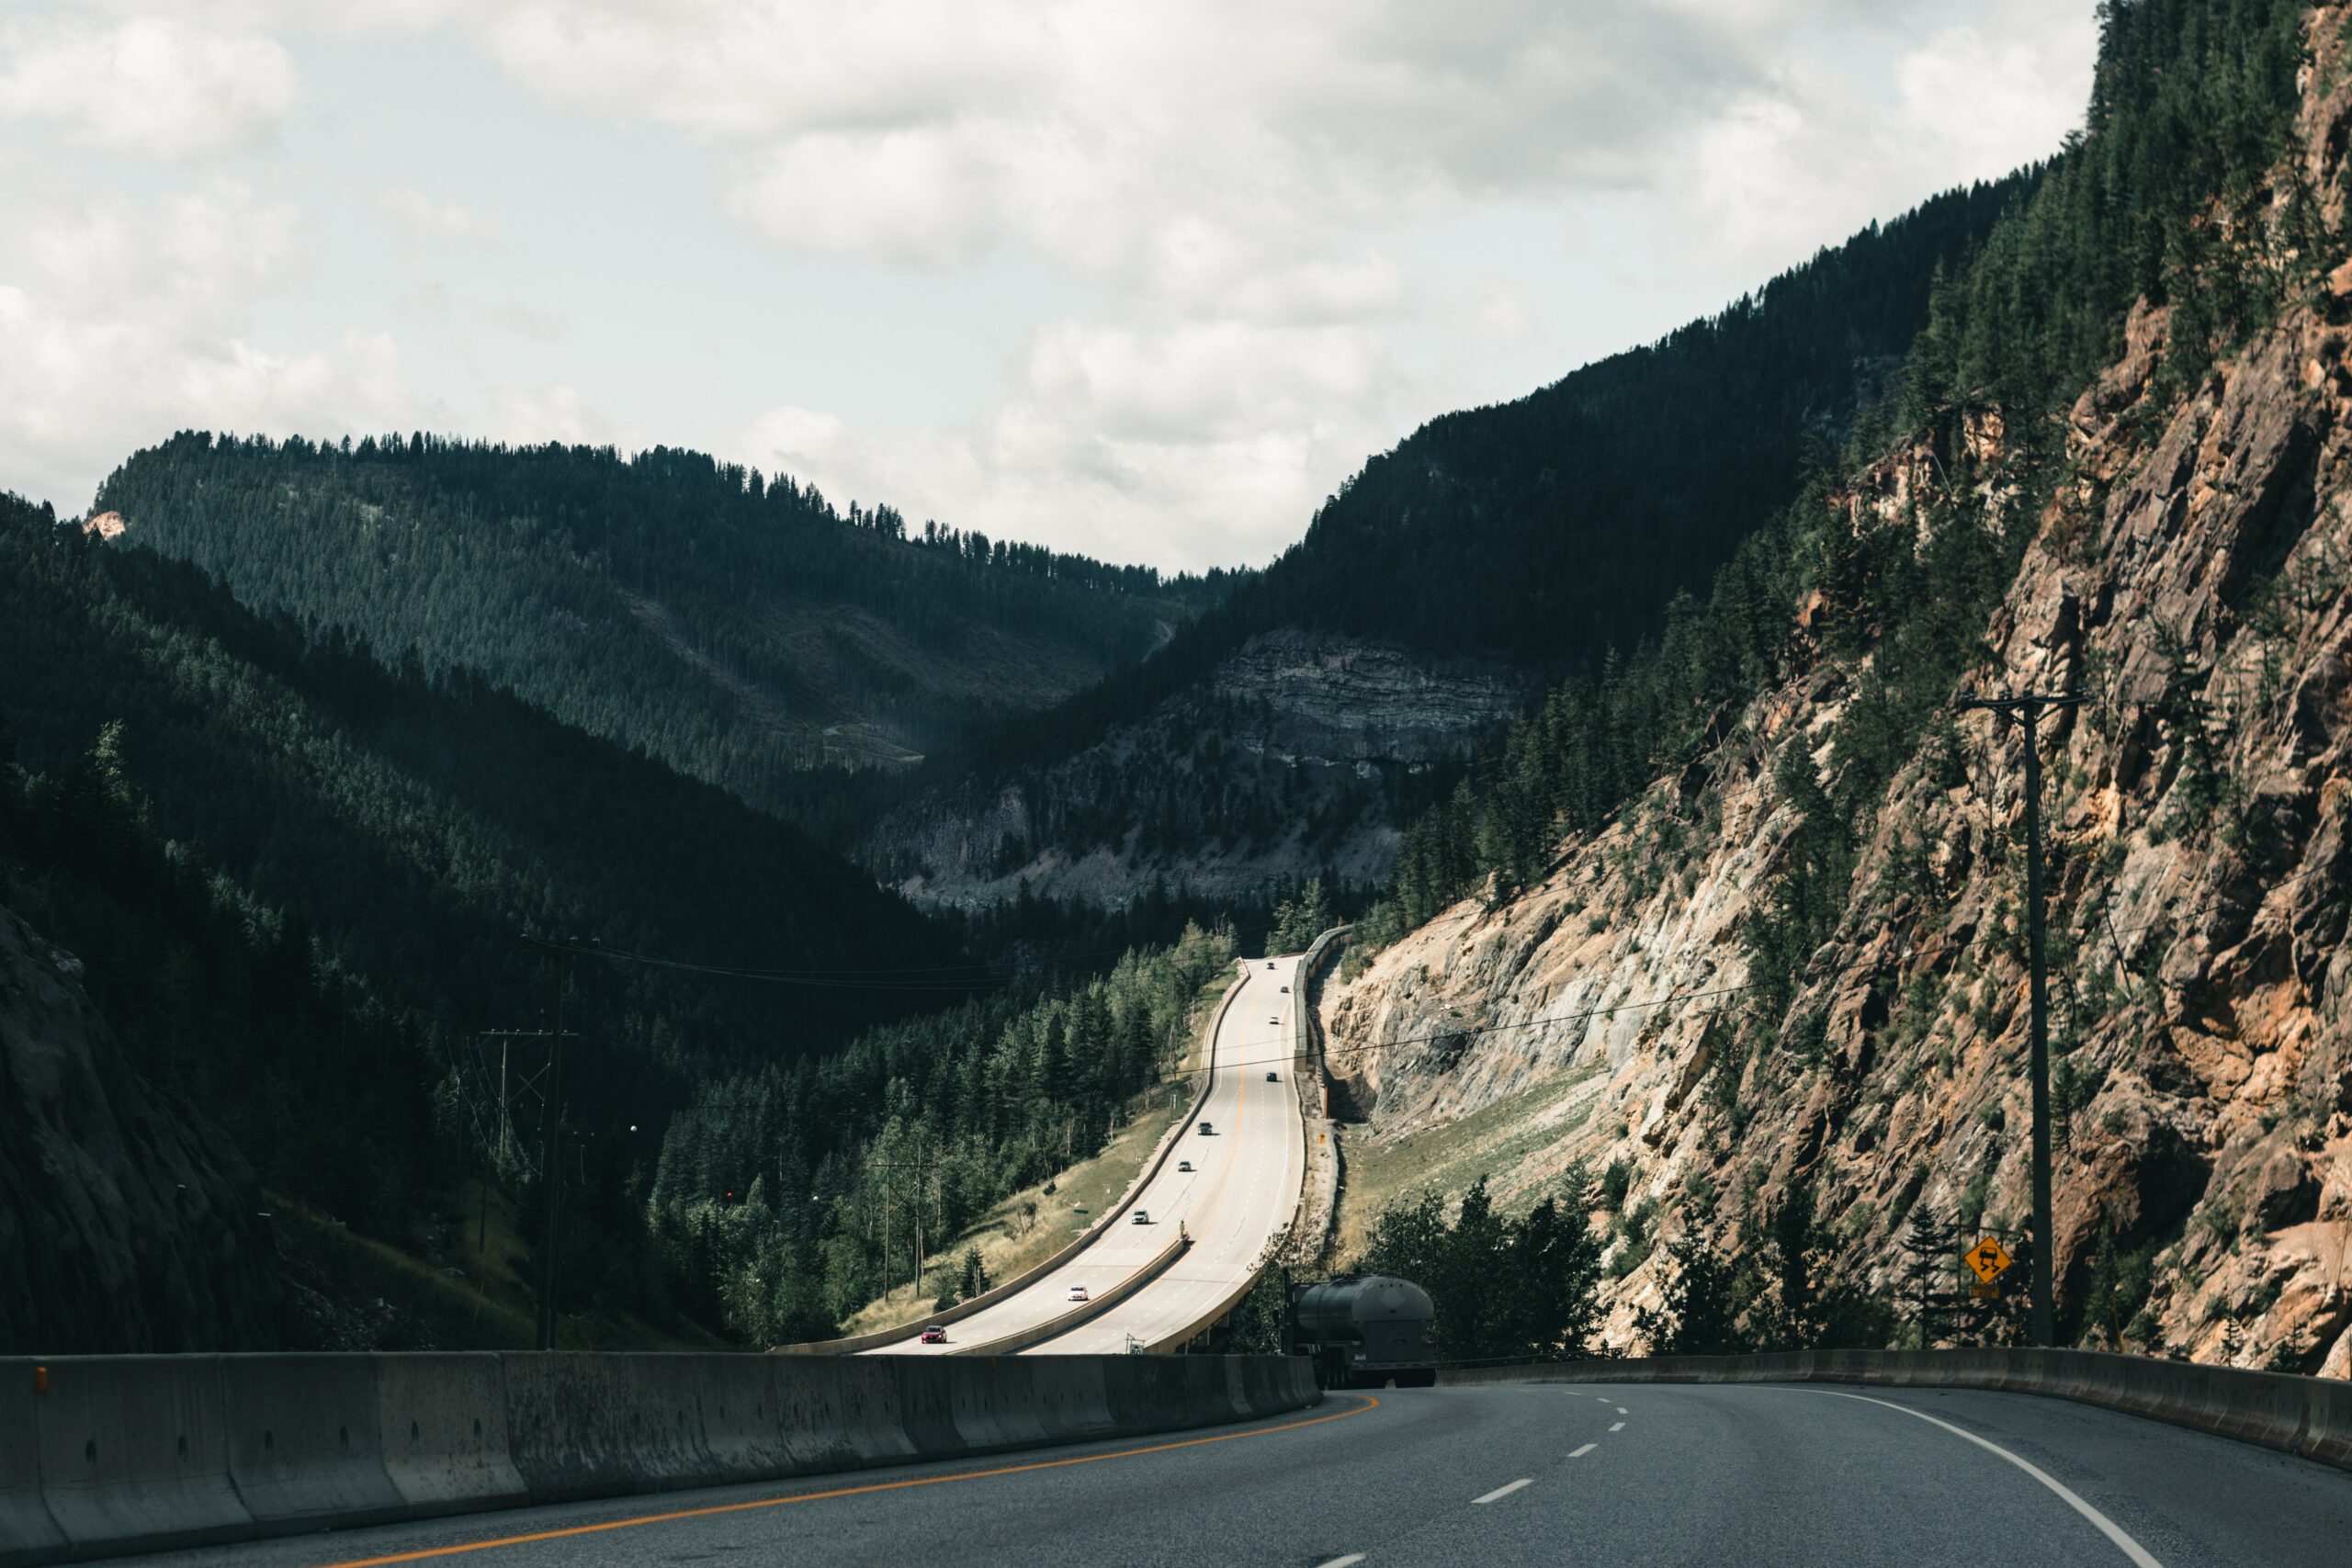 Can You Drive an RV on the Million Dollar Highway?